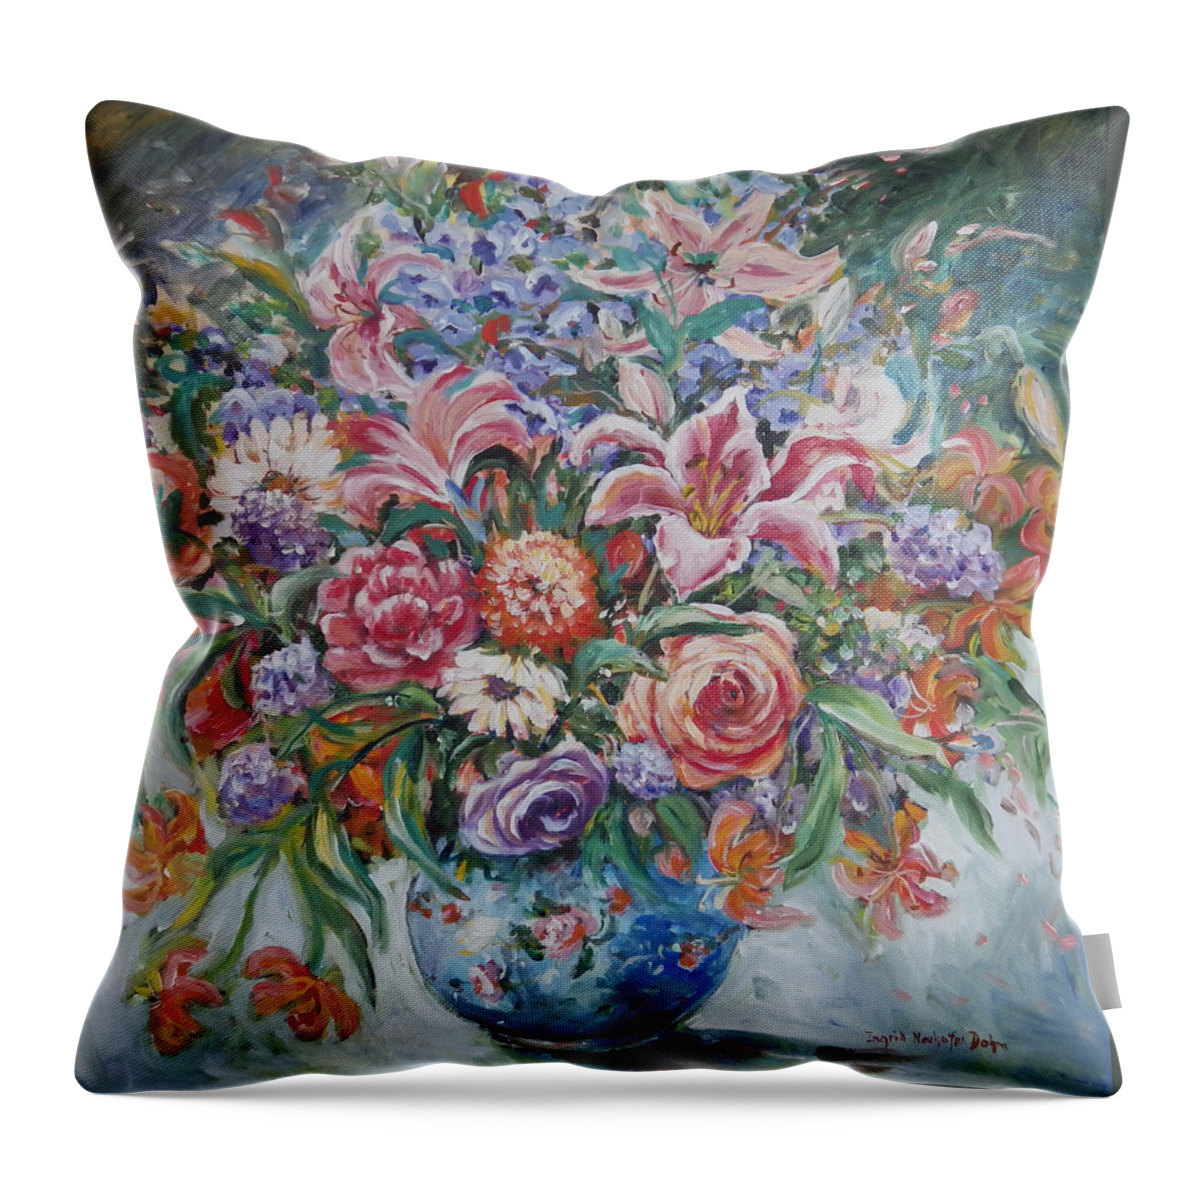 Red Throw Pillow featuring the painting Arrangement II #2 by Ingrid Dohm